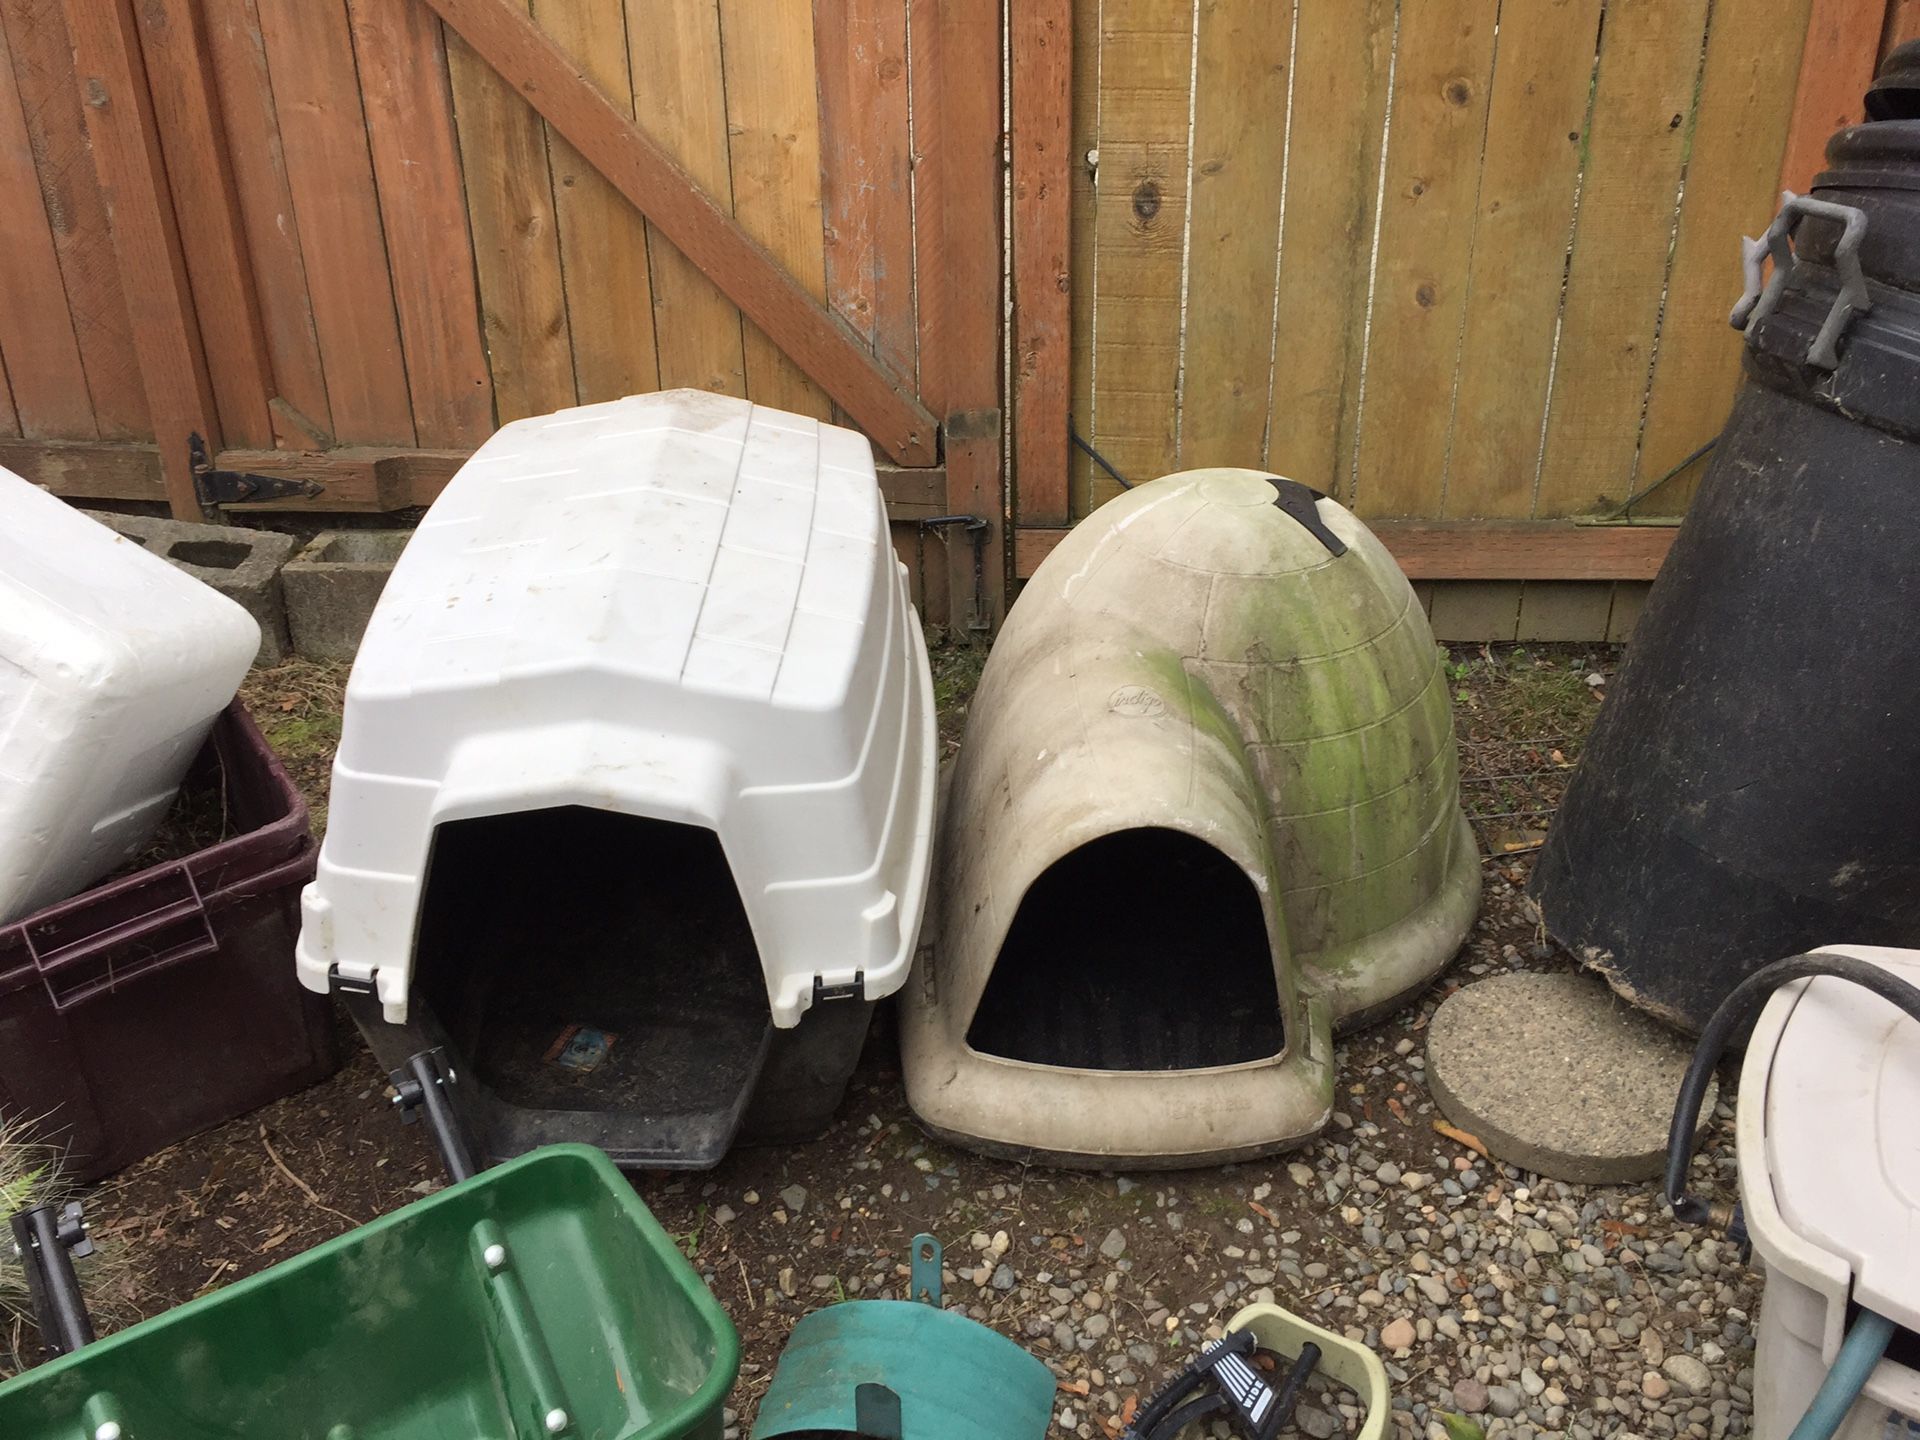 FREE - Dog house - the one on the left - breaks down into 2 stackable parts